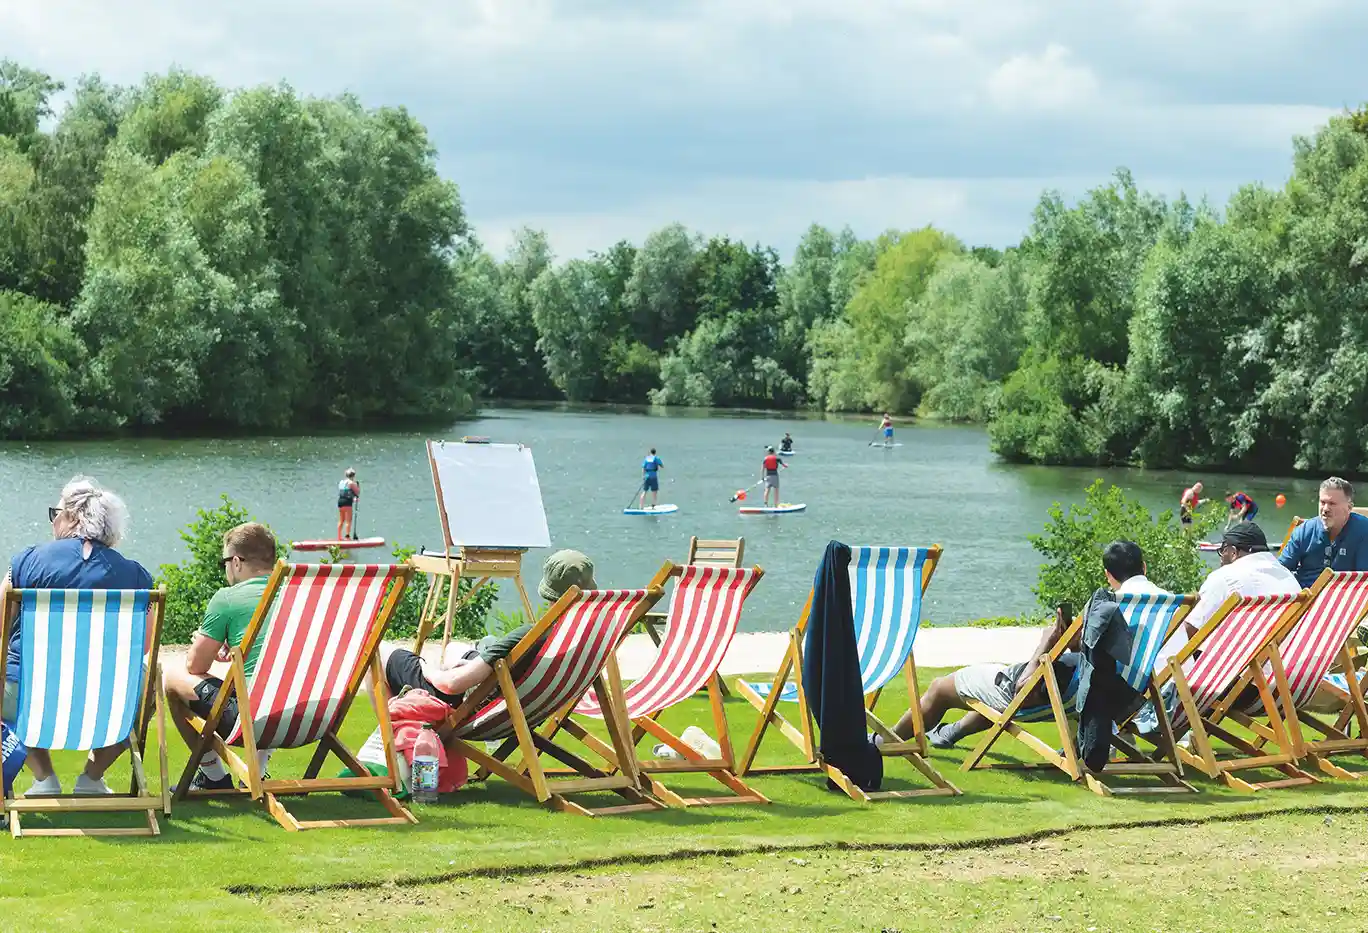 People sitting in deckchairs by the lake, watching paddleboarders